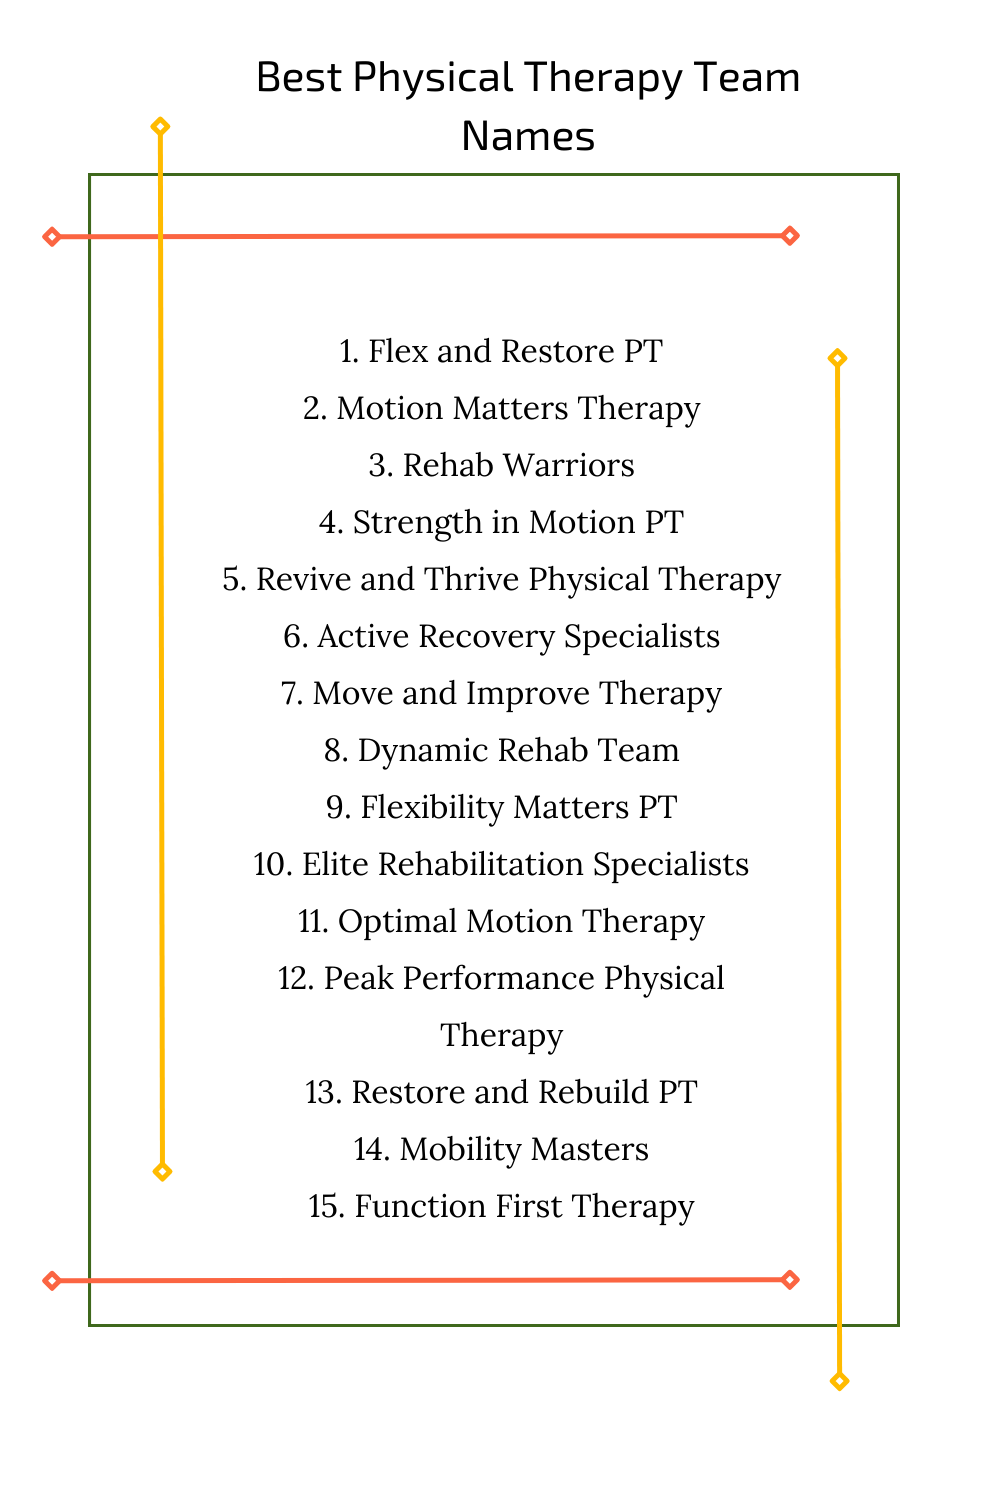 Best Physical Therapy Team Names